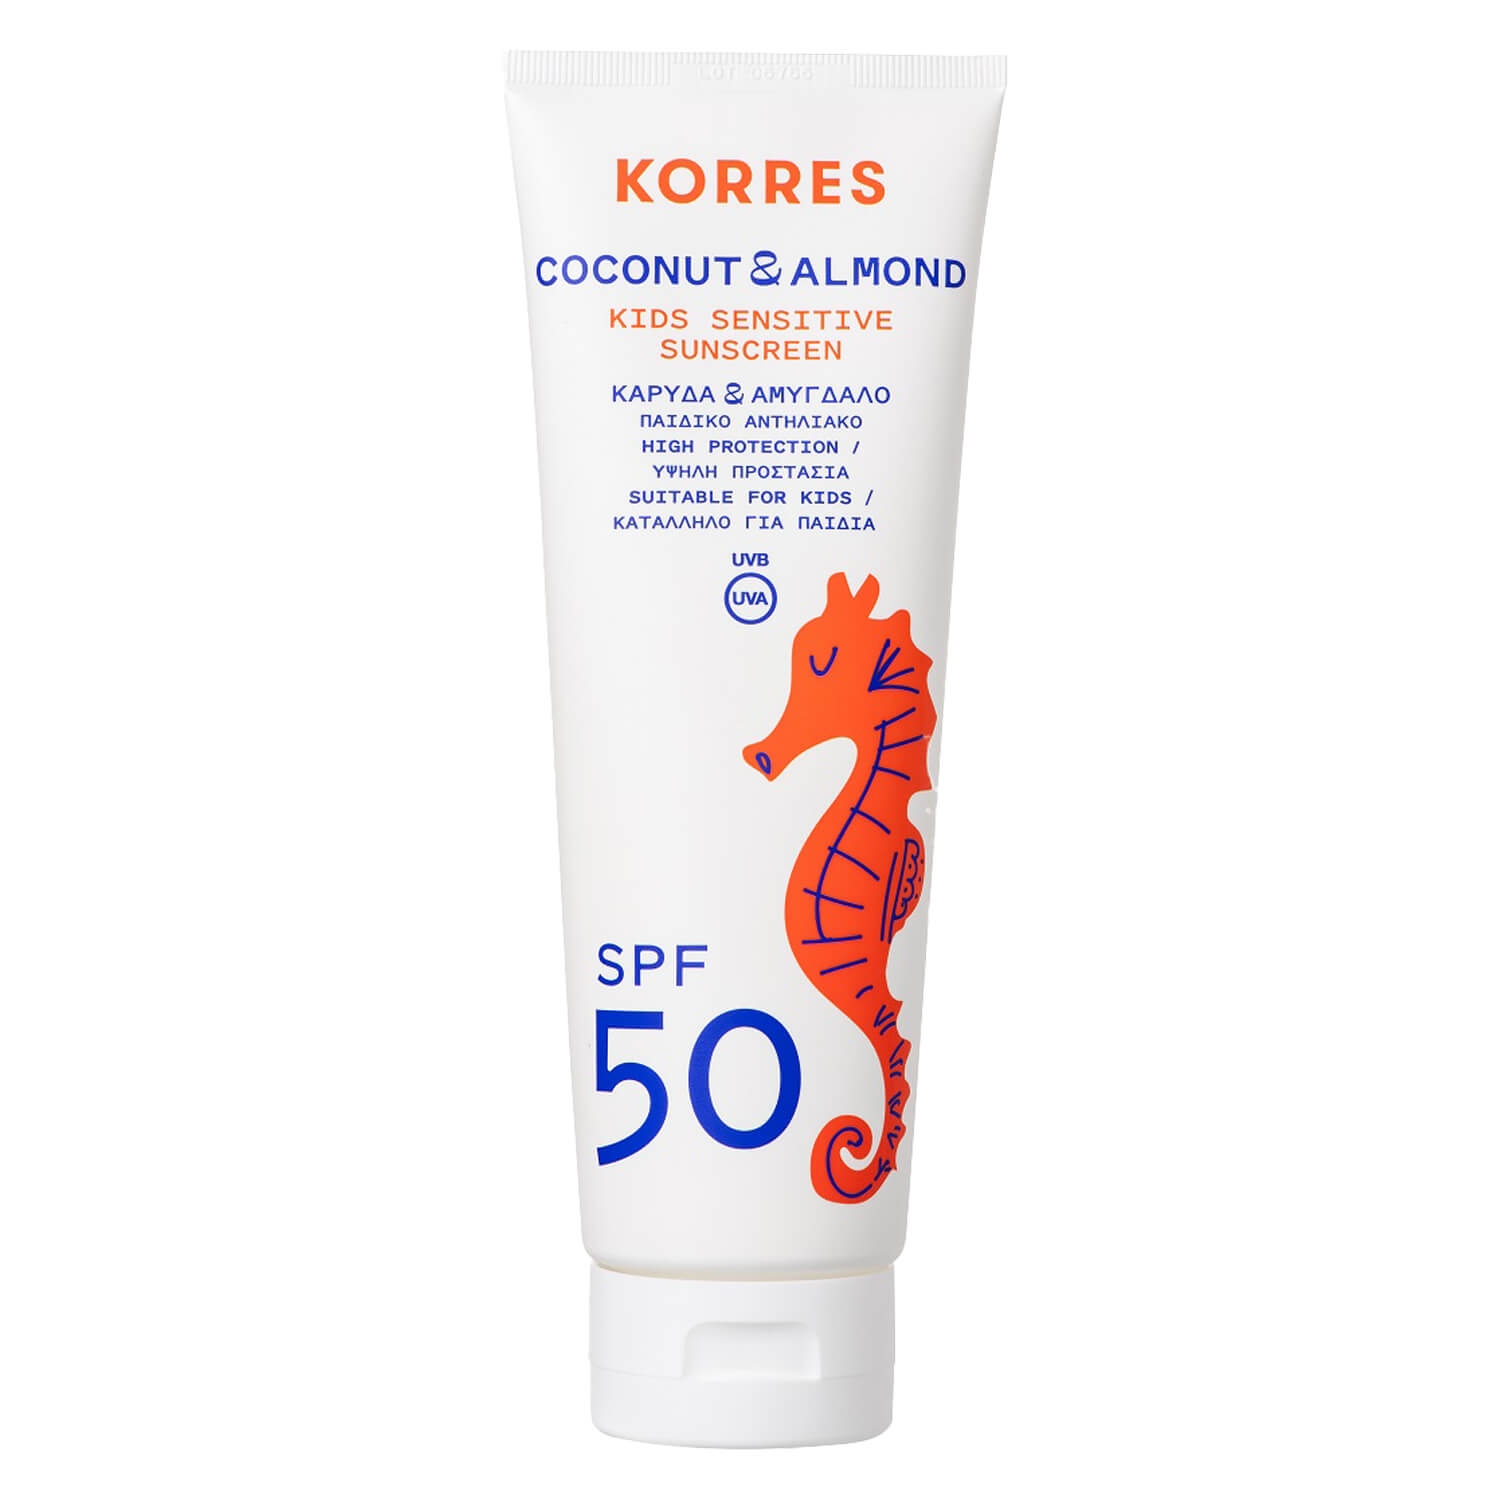 Product image from Korres Care - Coconut Almond Kids Sensitive Sunscreen SPF50 Face & Body